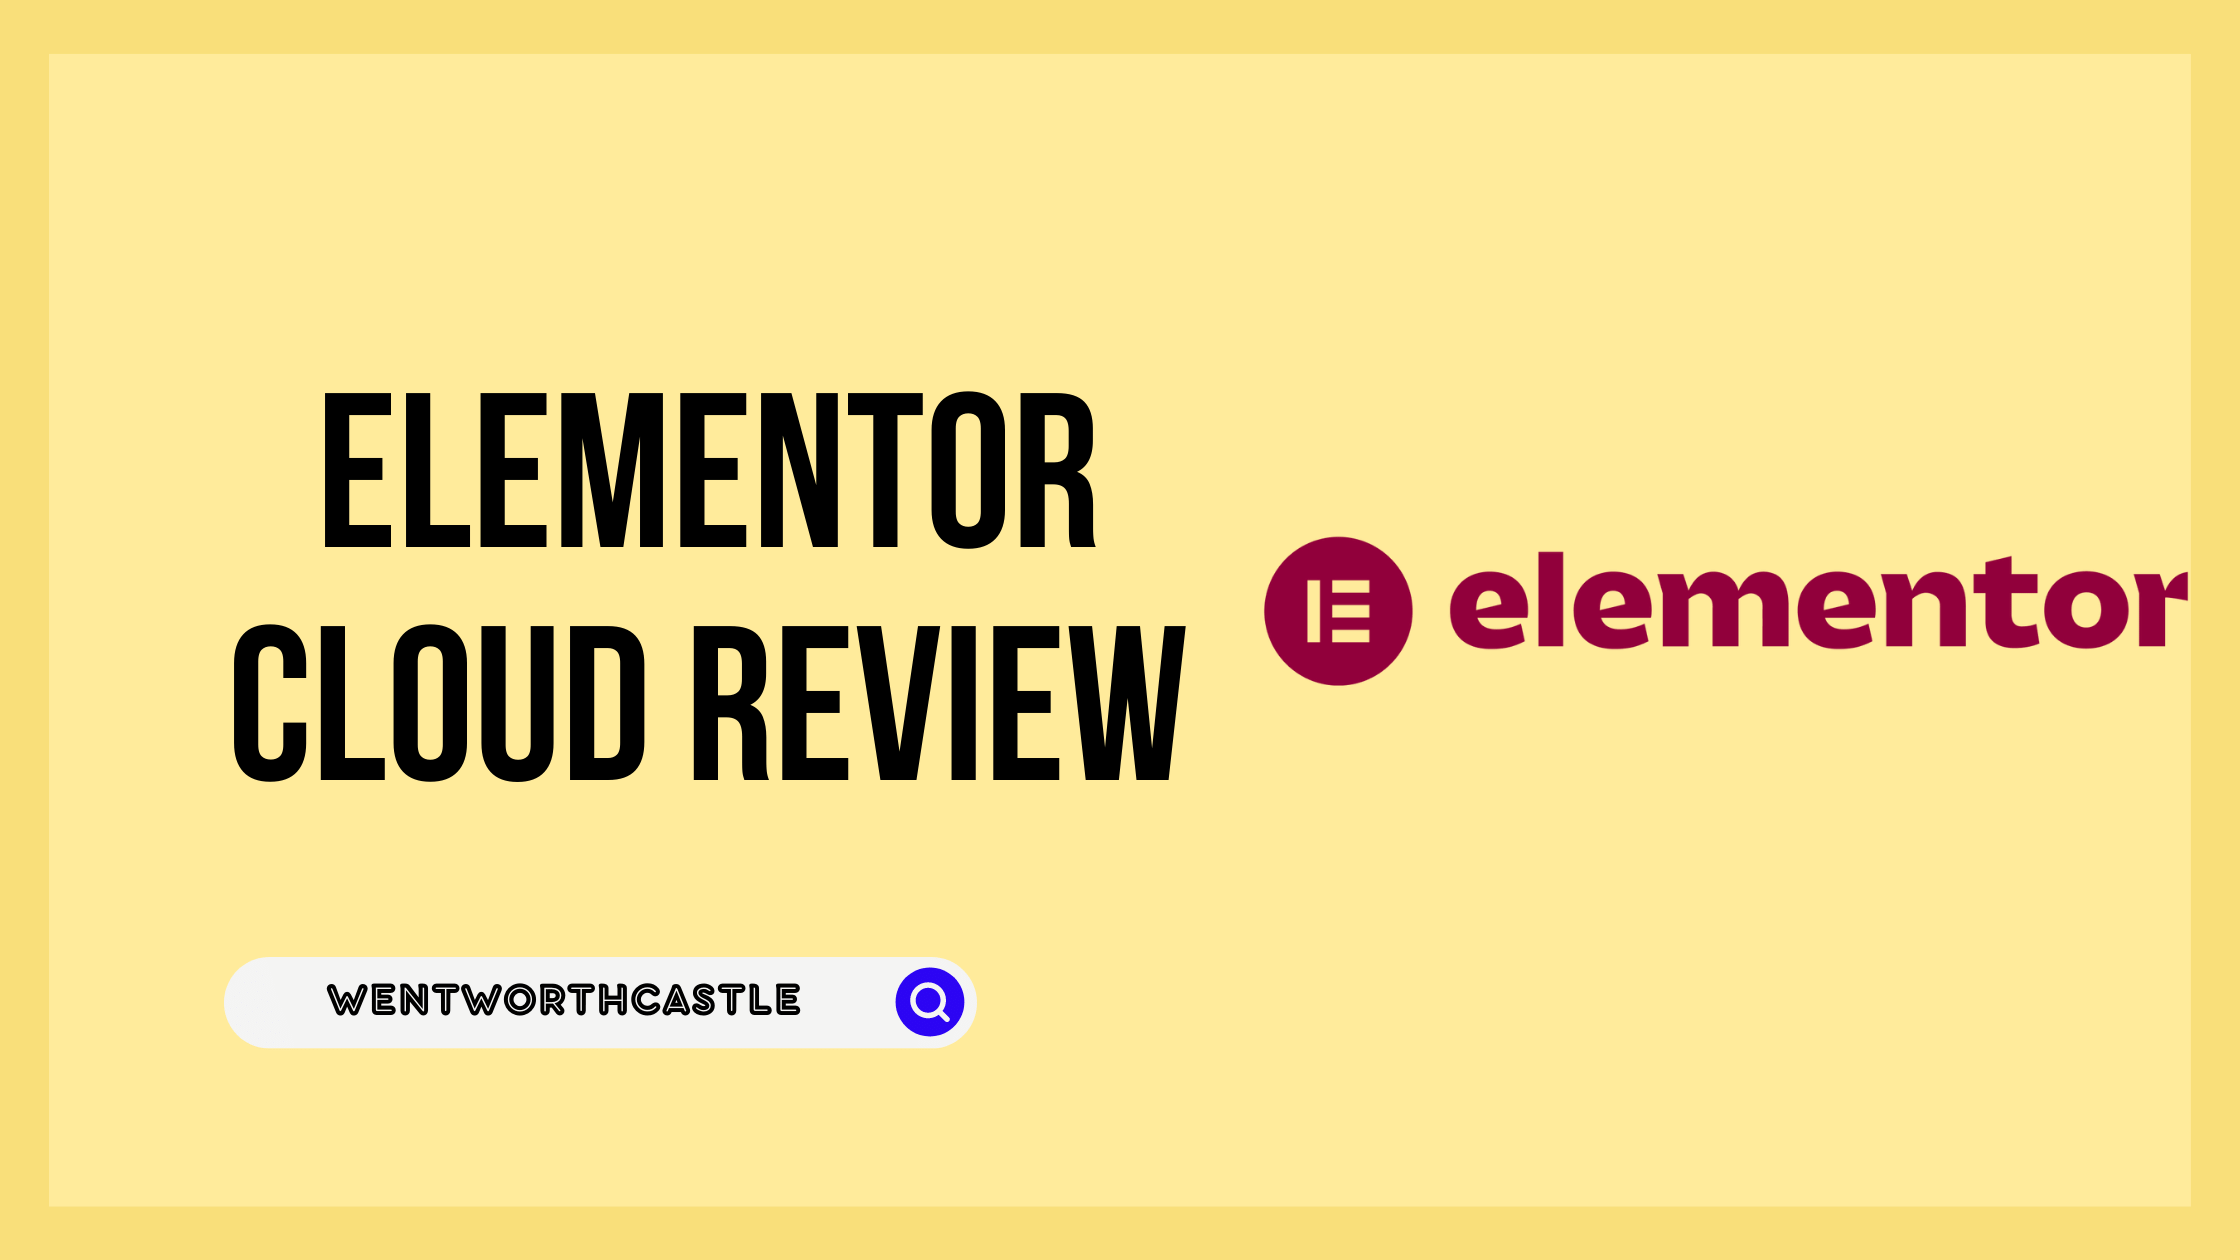 Elementor Cloud Review - WentWorthCastle